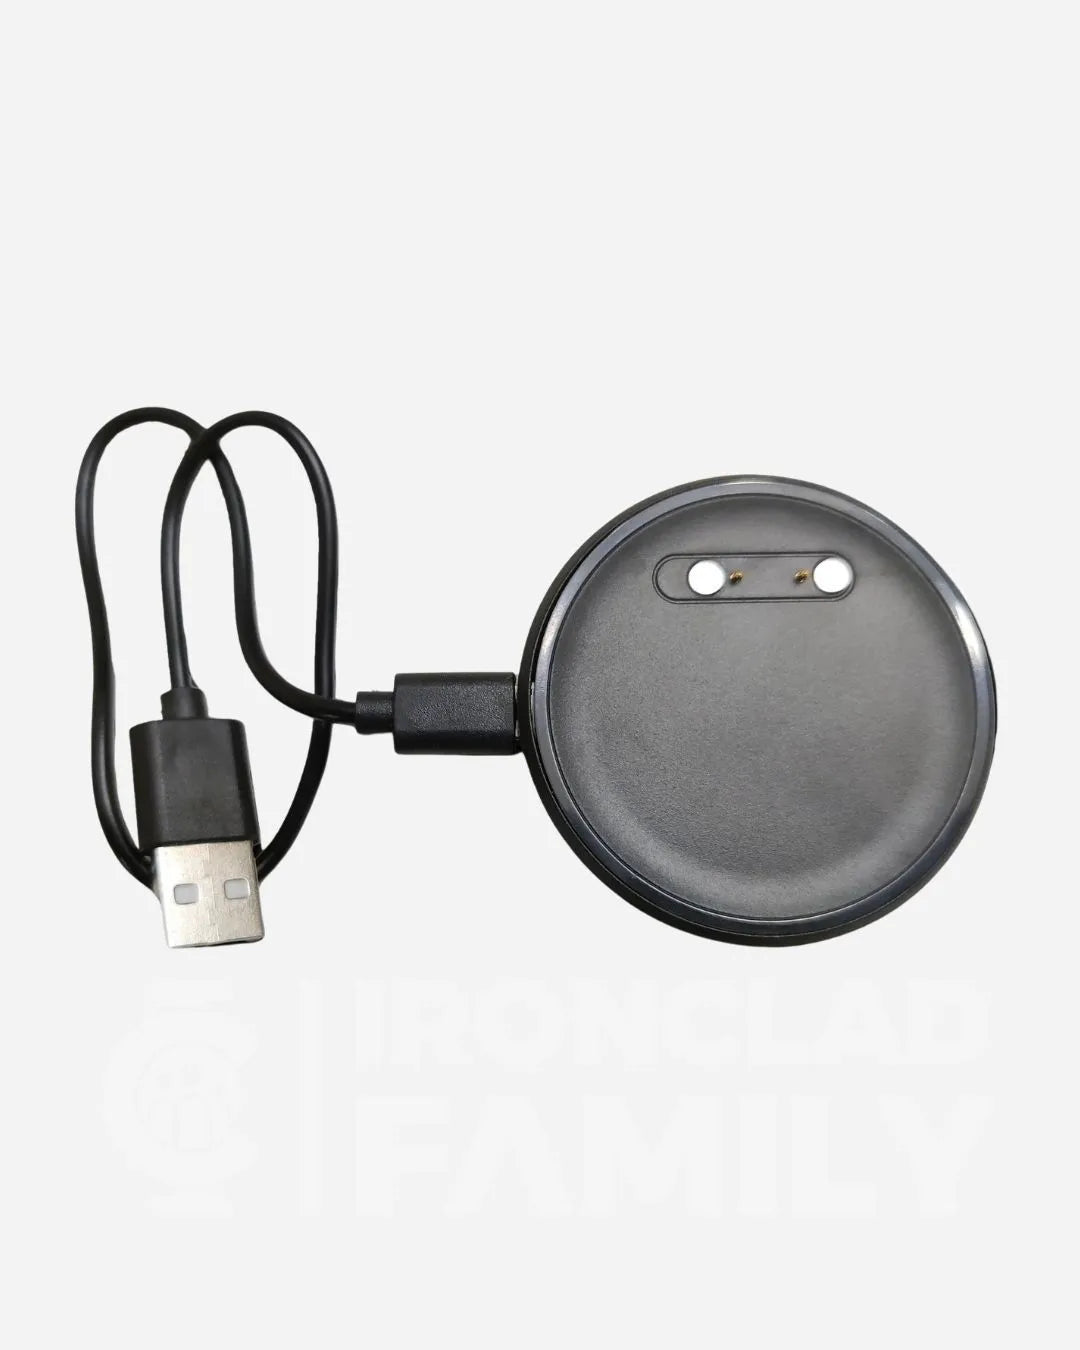 Black USB charger and cord for GPS tracker